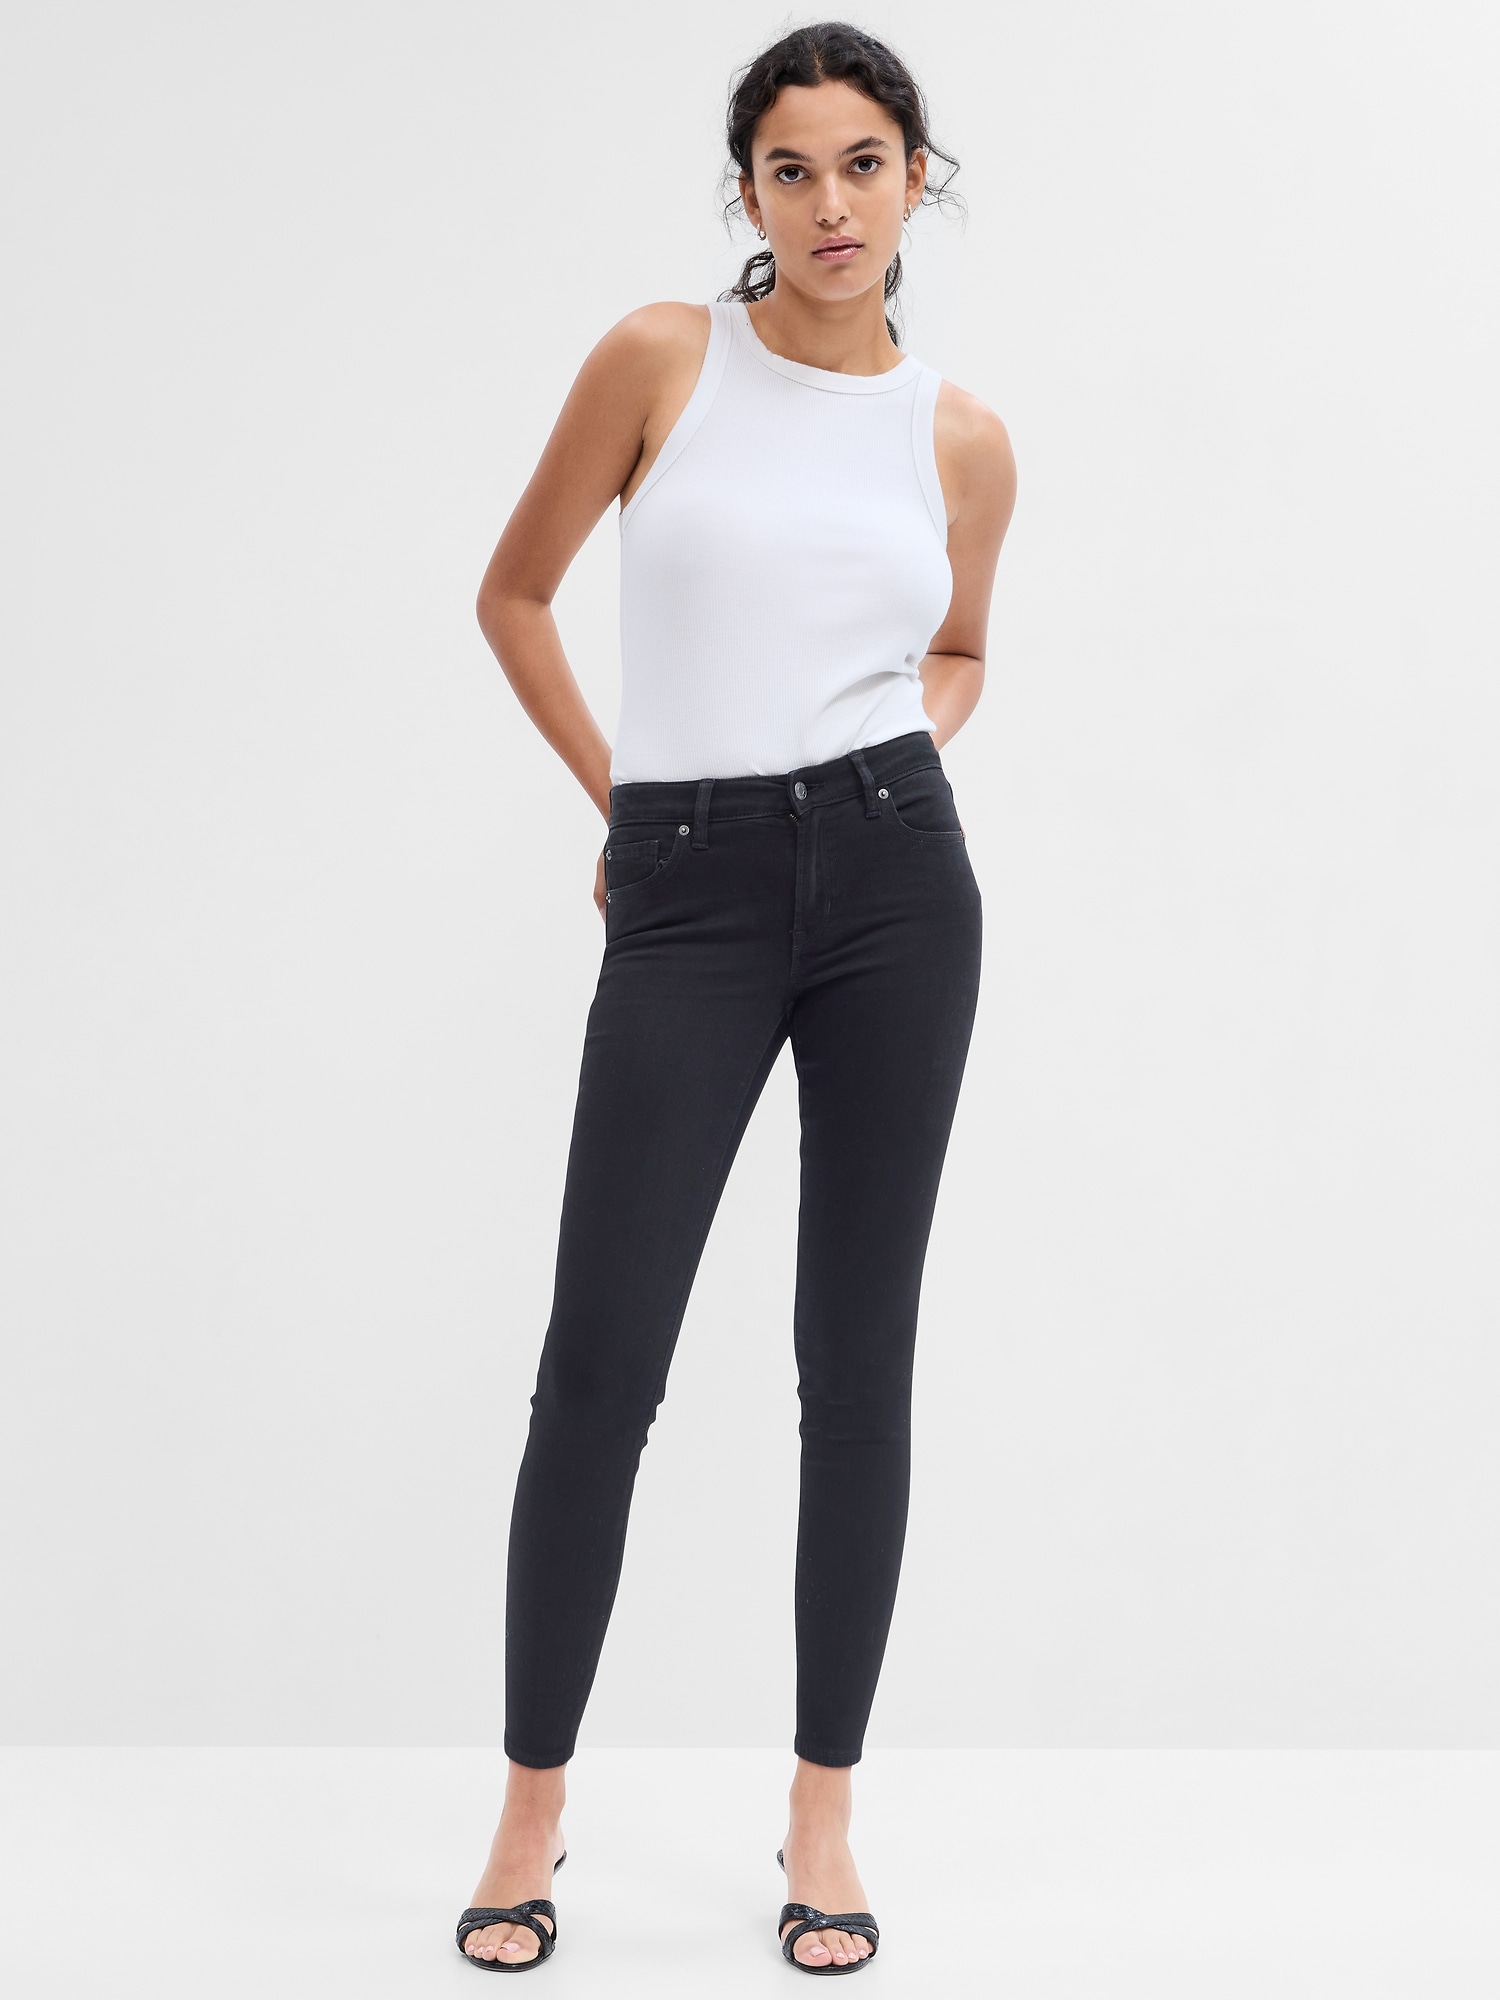 Extra Long Inseam Jeans